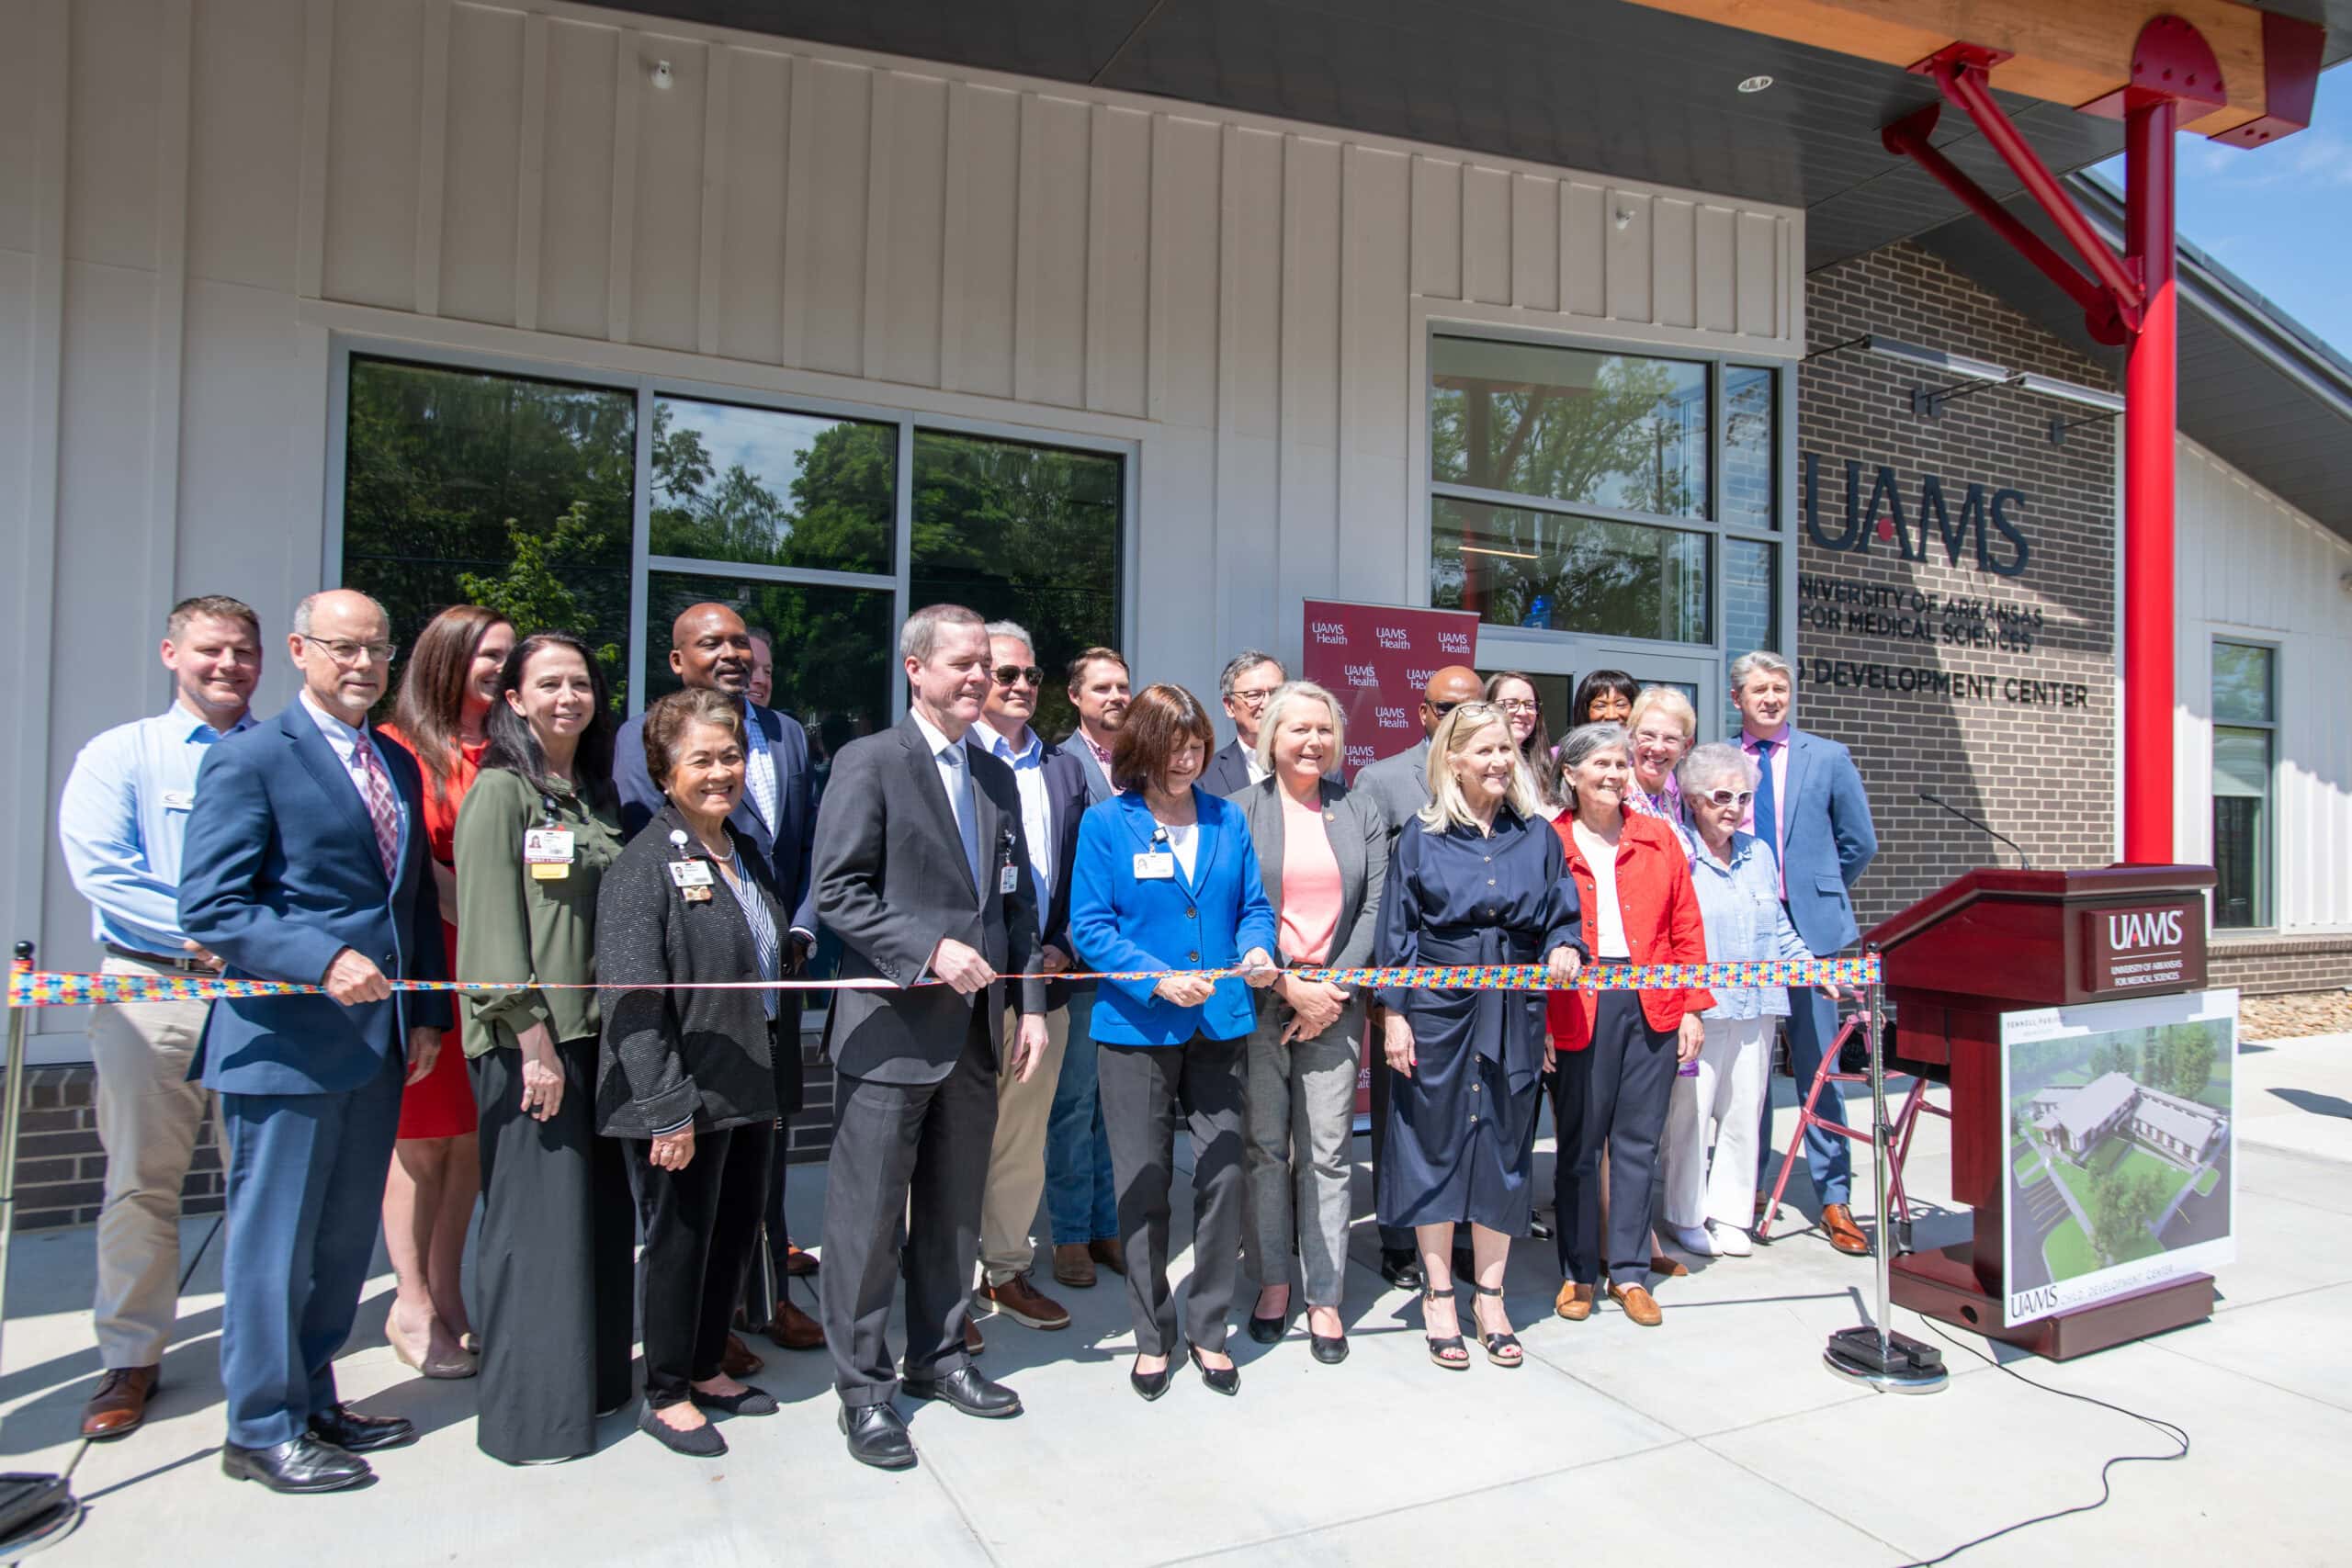 Stephanie Gardner, UAMS provost and chief strategy officer, cuts the ribbon at a ceremony to celebrate the UAMS Child Development Center, which is scheduled to open in early May.